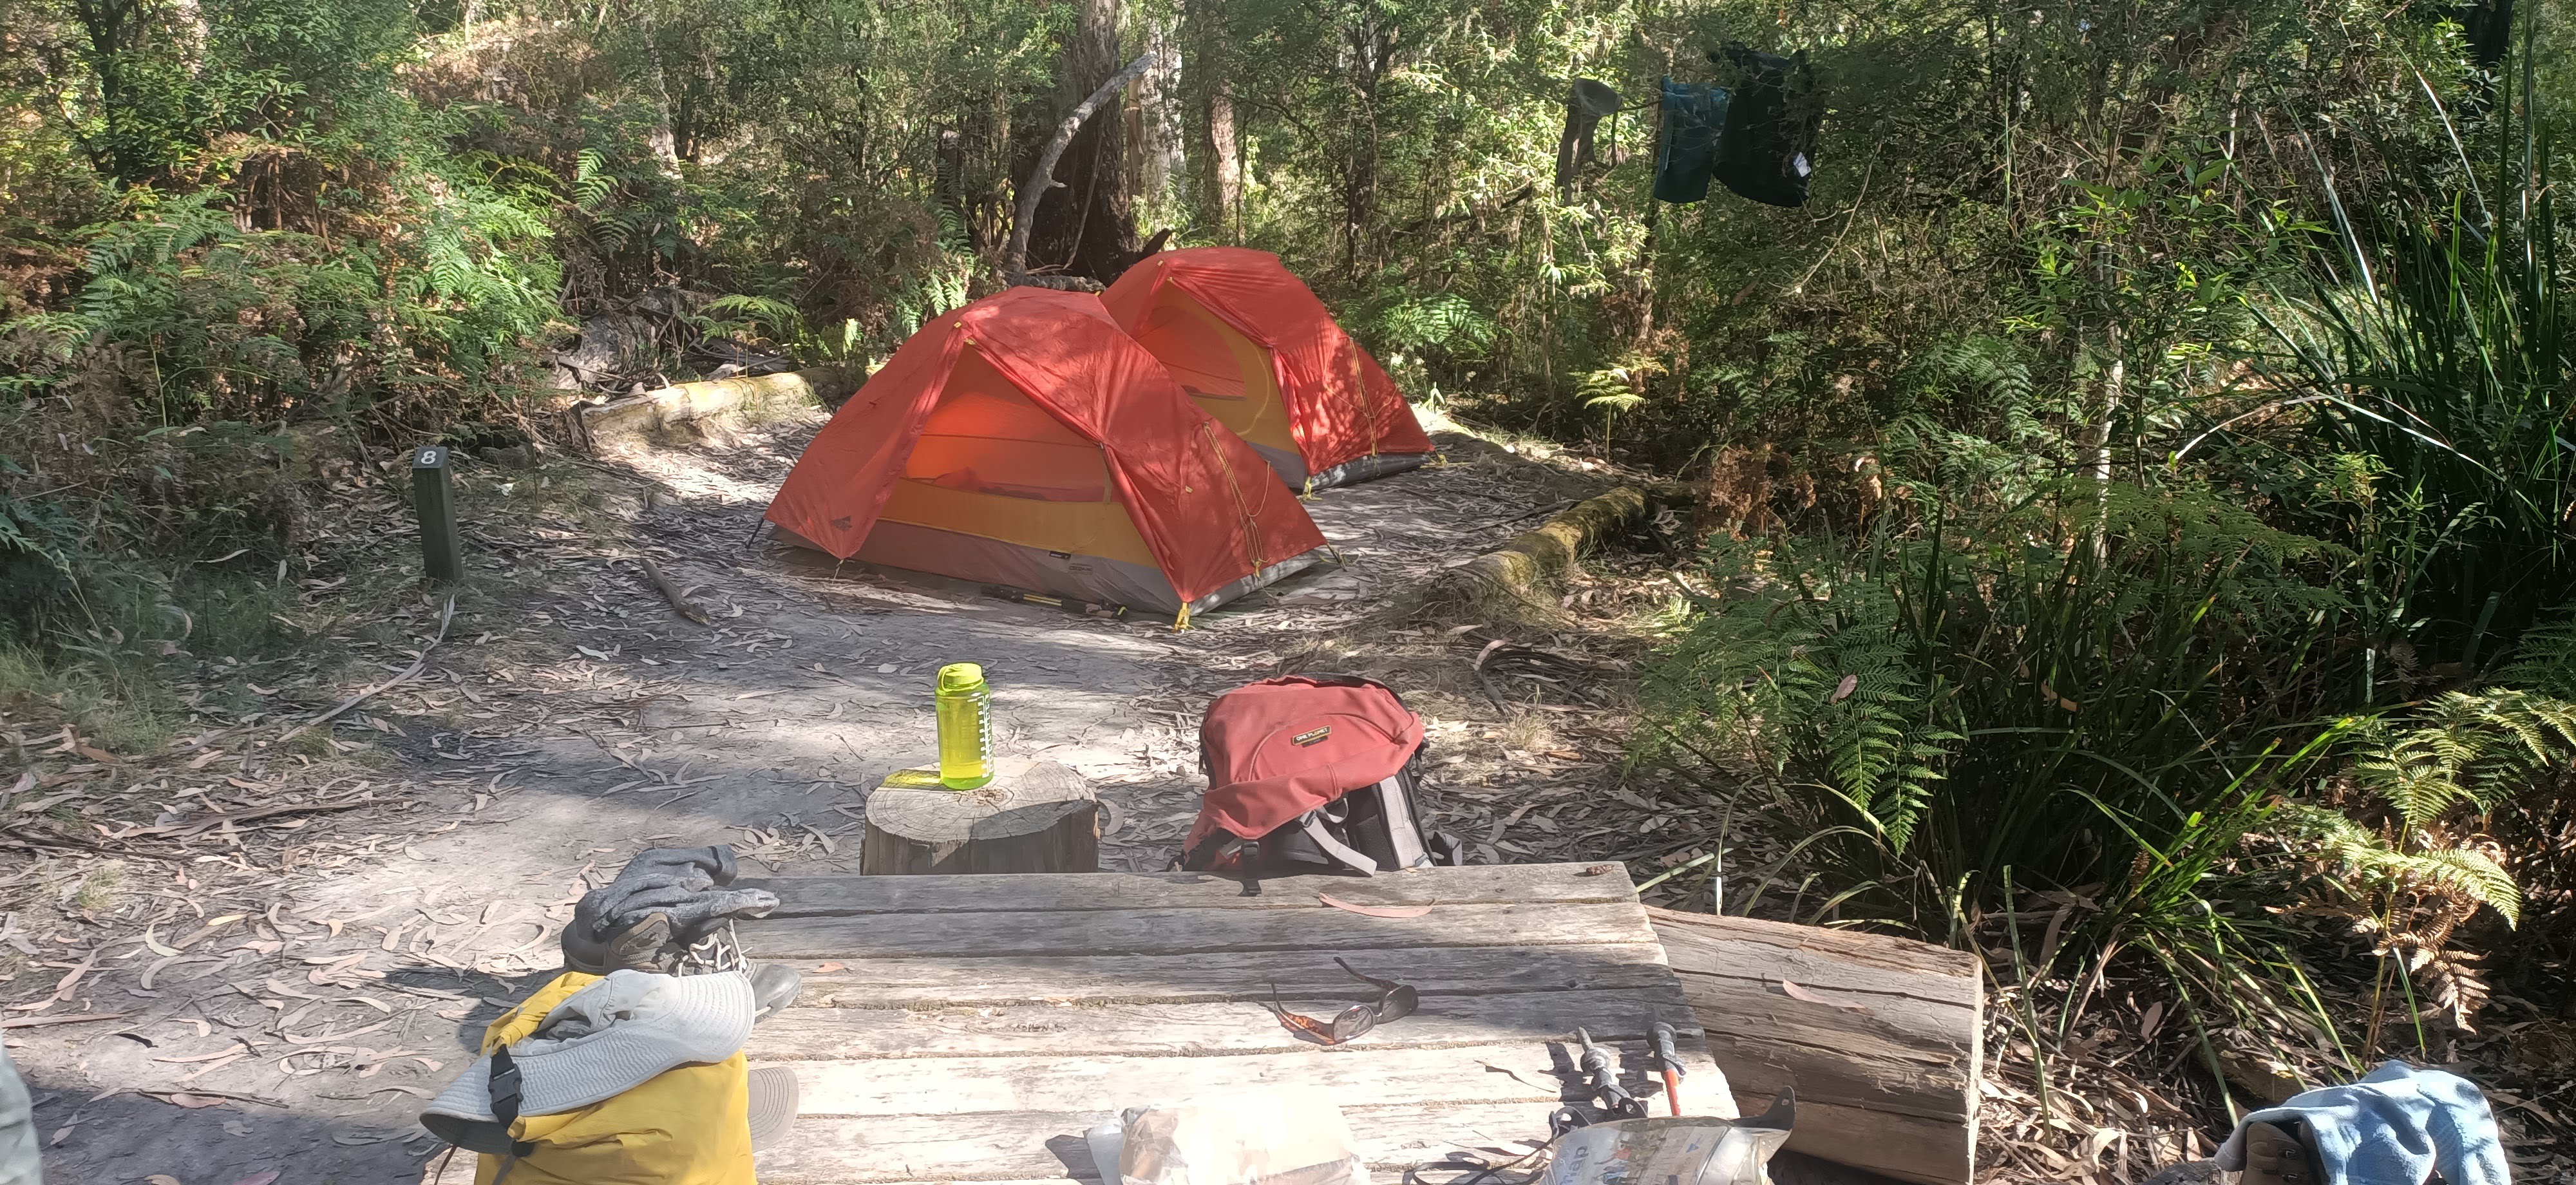 Two red tents and various hiking equipment set up across bare dirt that is surrounded by coastal bush. There is a wooden low table with camping equipment and backpacks surrounding it.